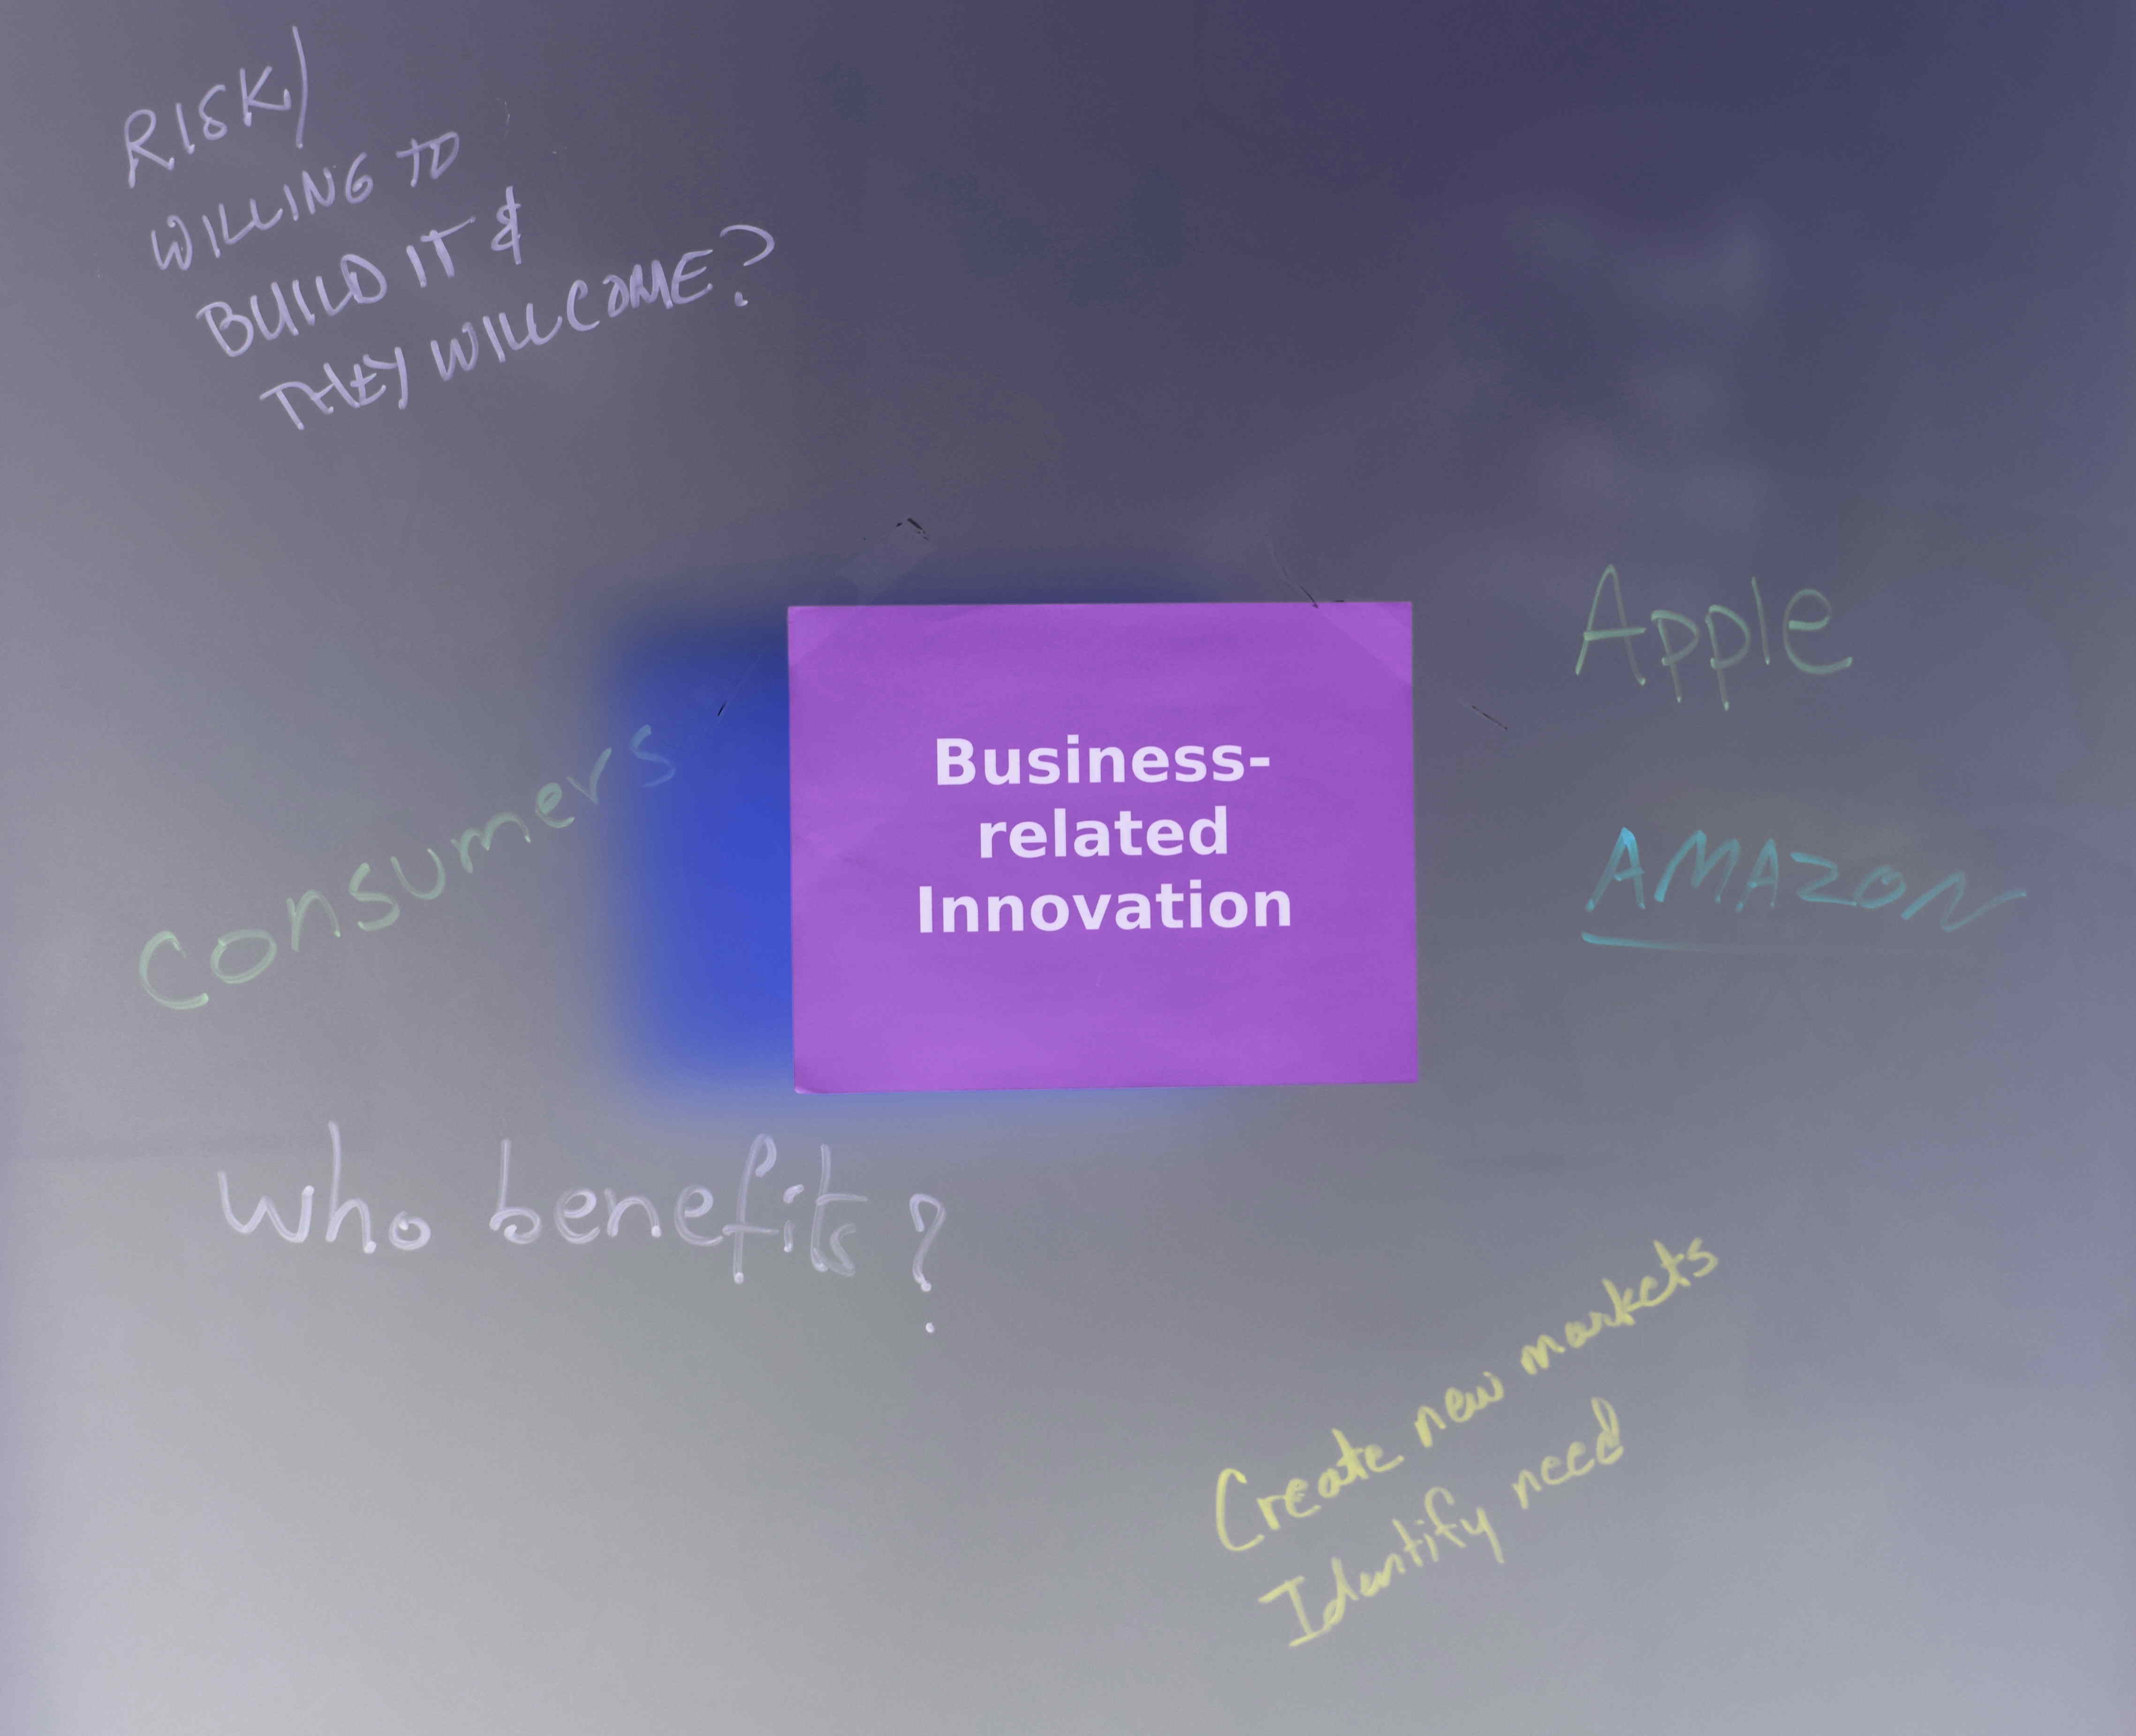 Mind-map ideas related to business innovation contributed by guests